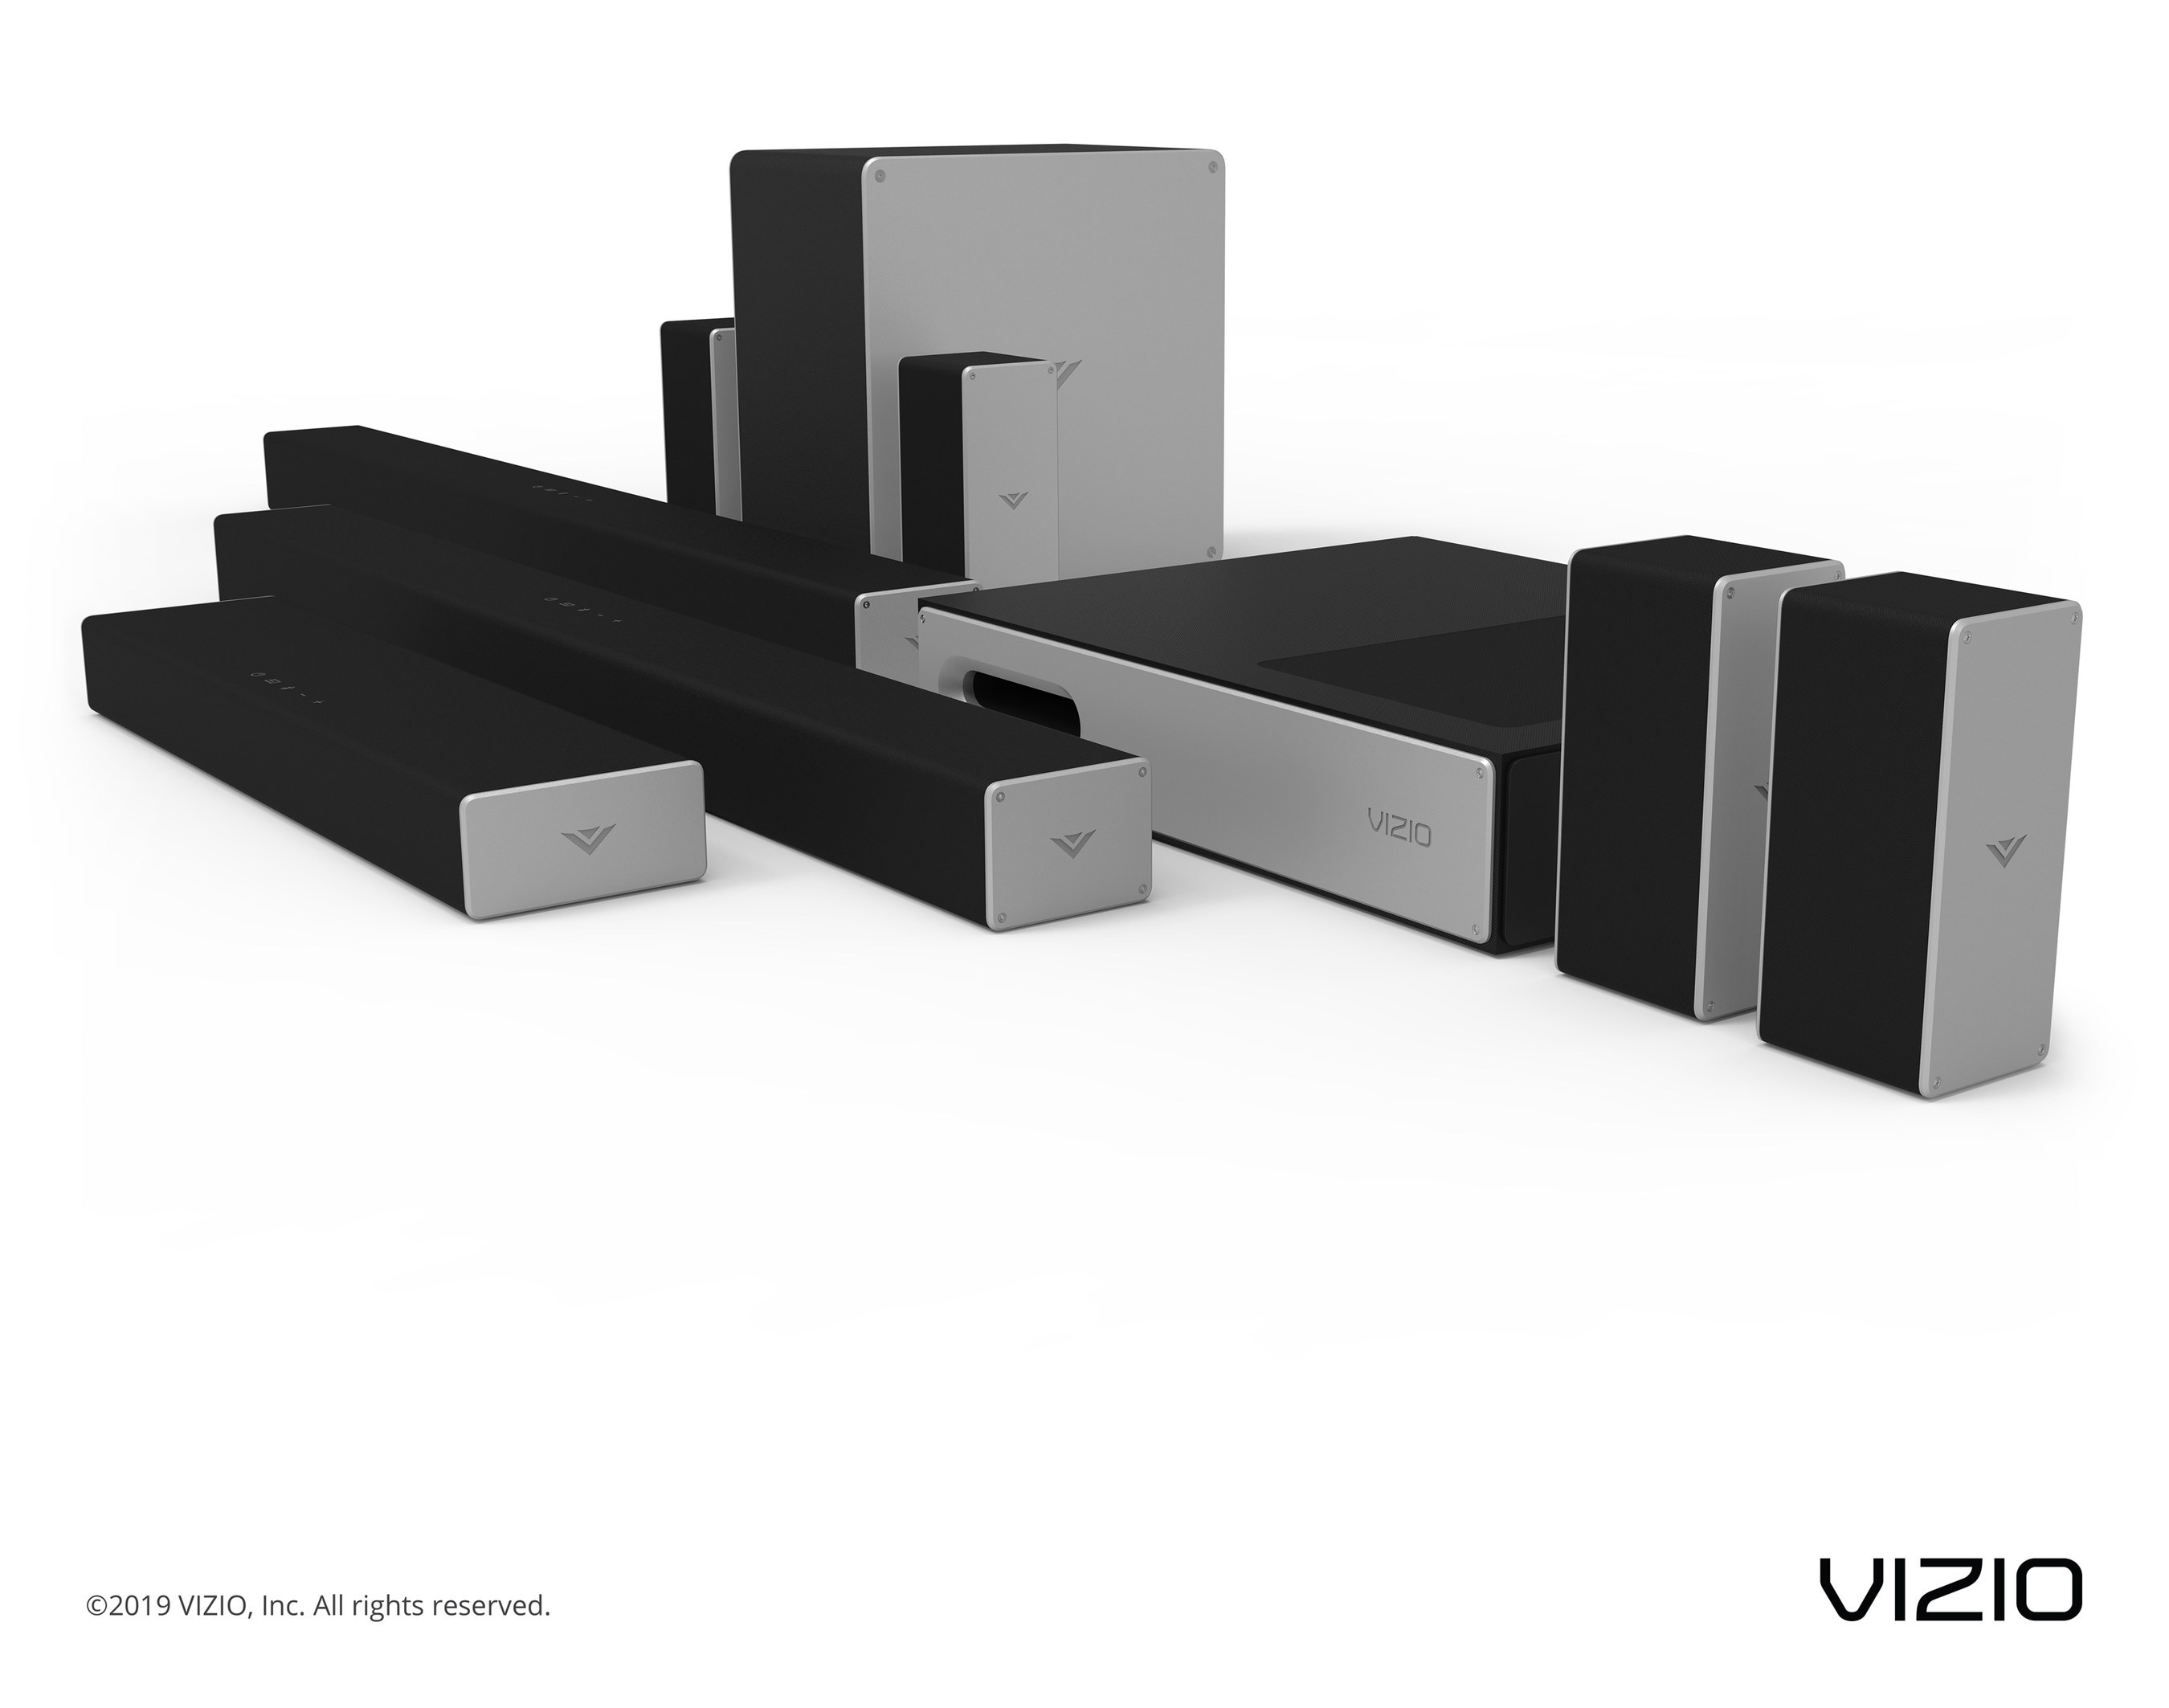 VIZIO Announces 2019 Audio Collection at CES 2019, Highlighted by Additional Dolby Atmos® Offerings Along With New Sound Bar and Subwoofer Designs